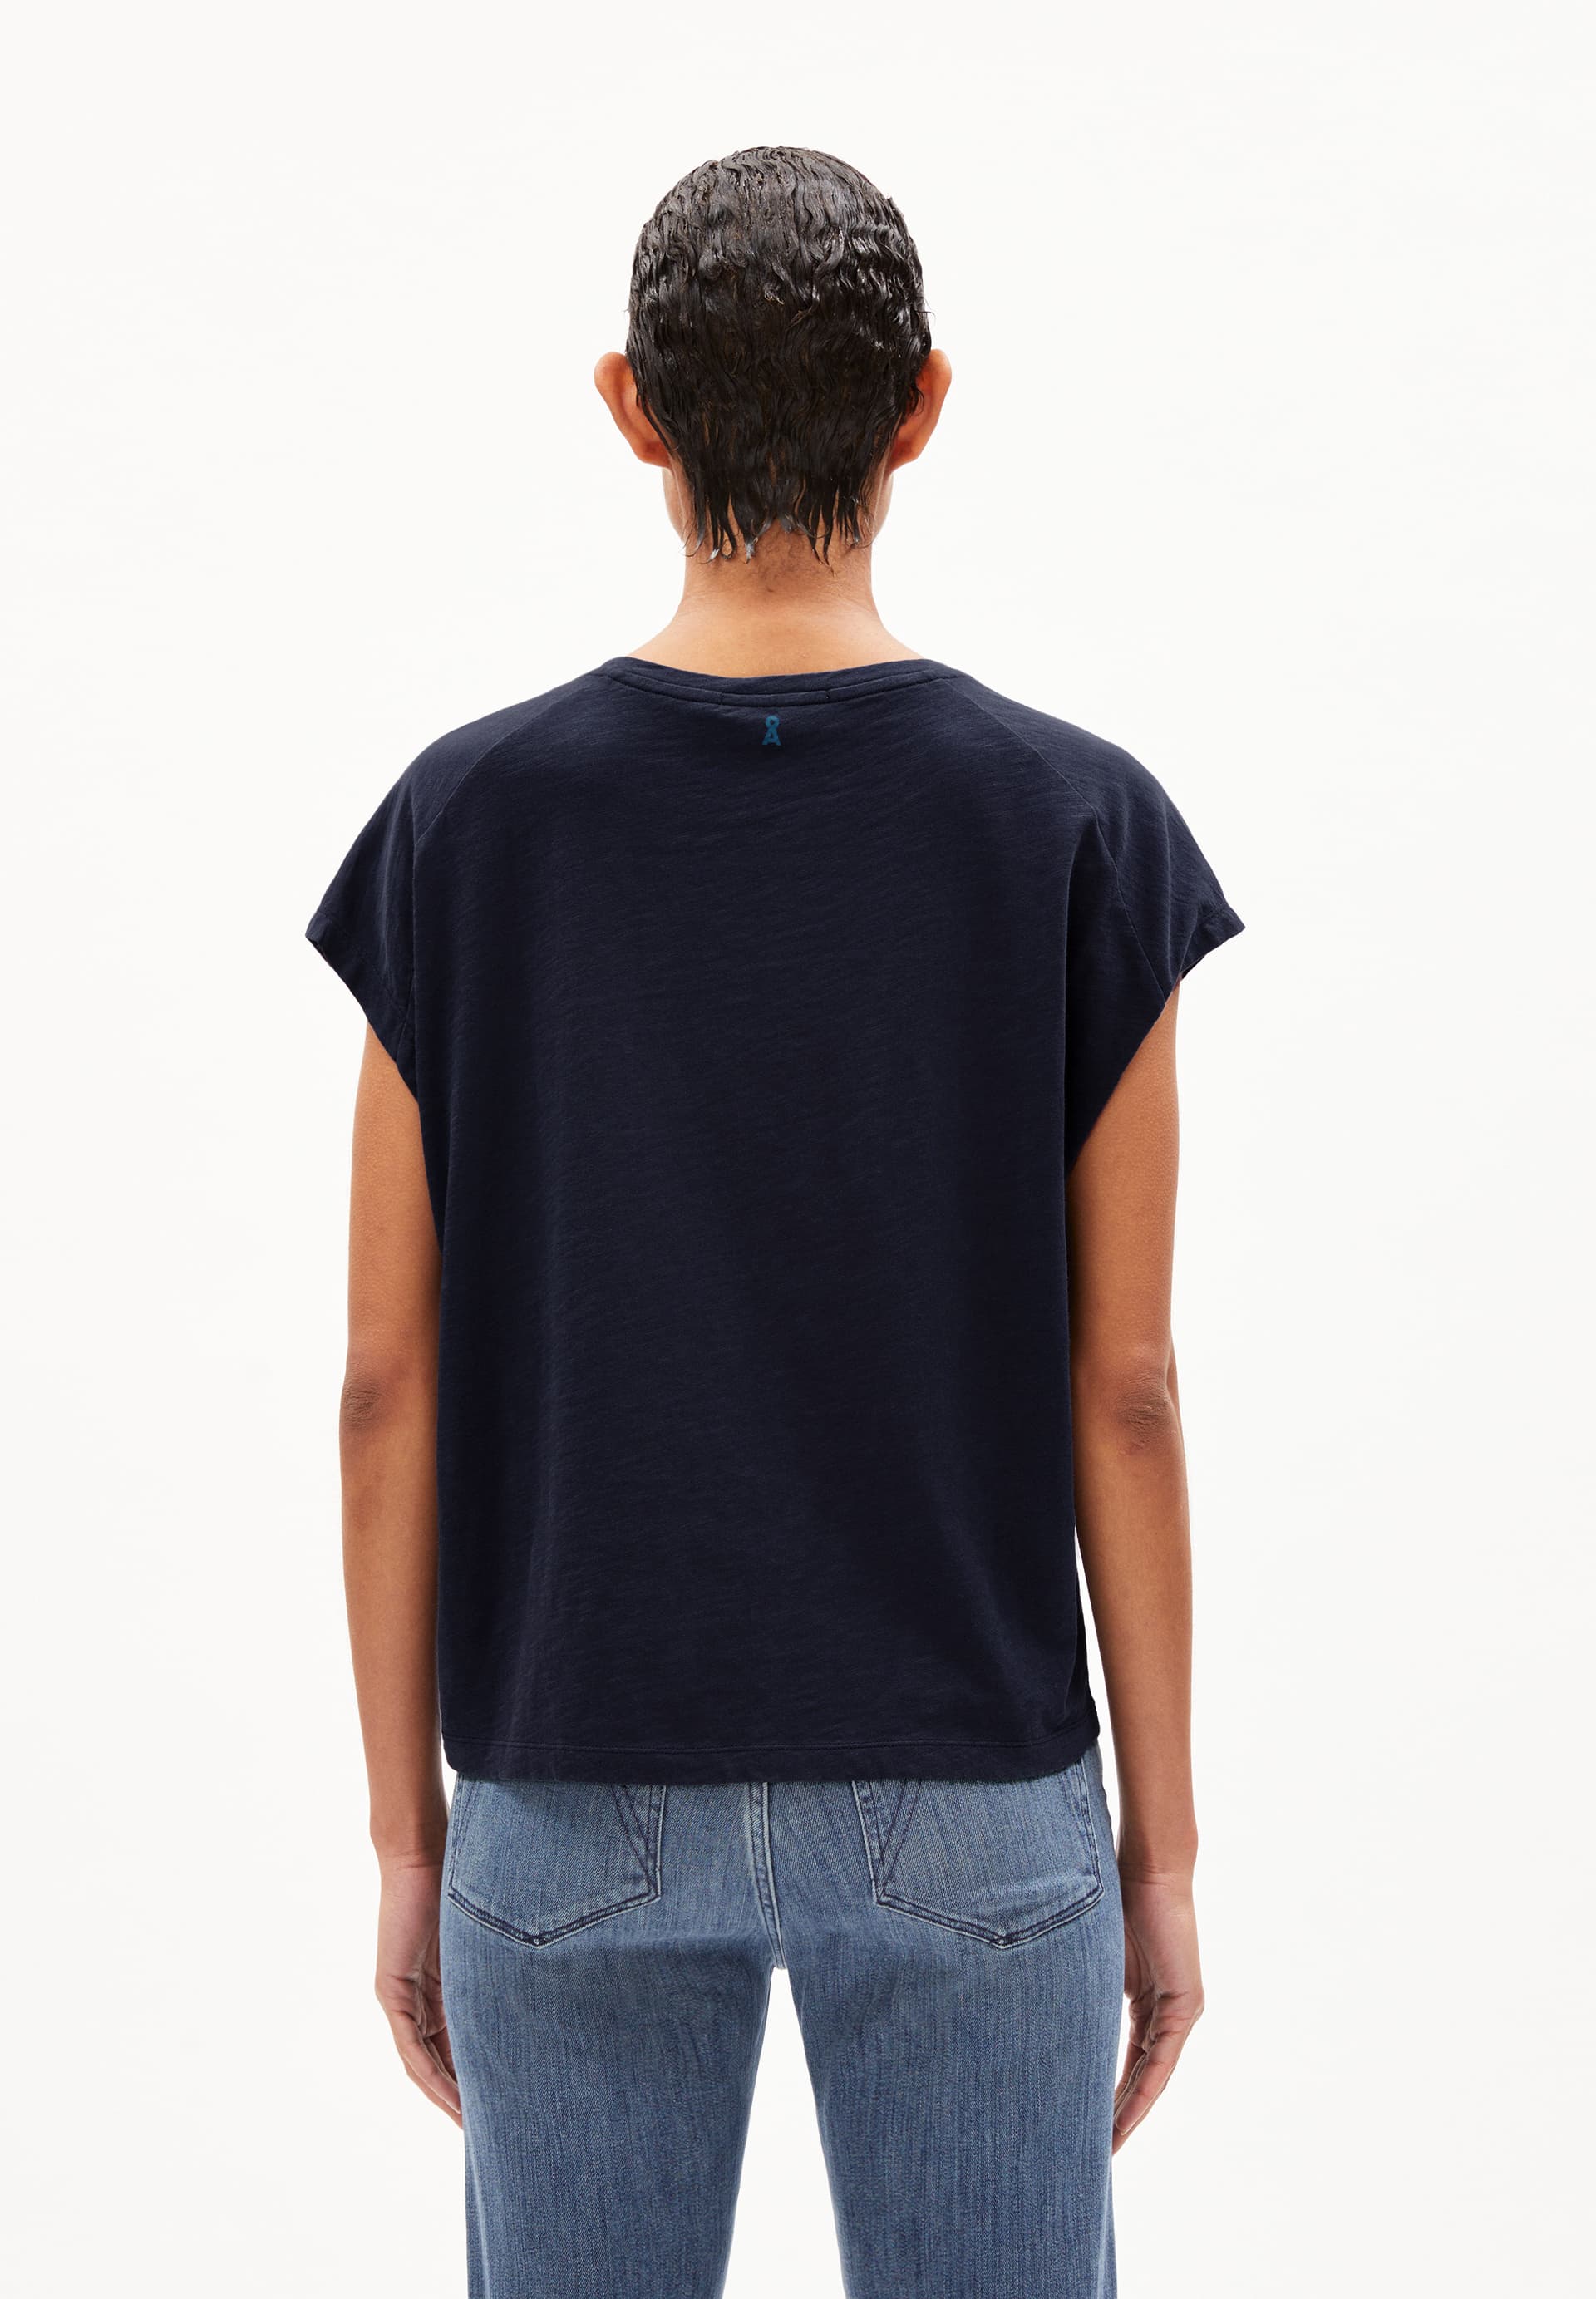 ONELIAA FAANCY T-Shirt  Loose Fit made of Organic Cotton